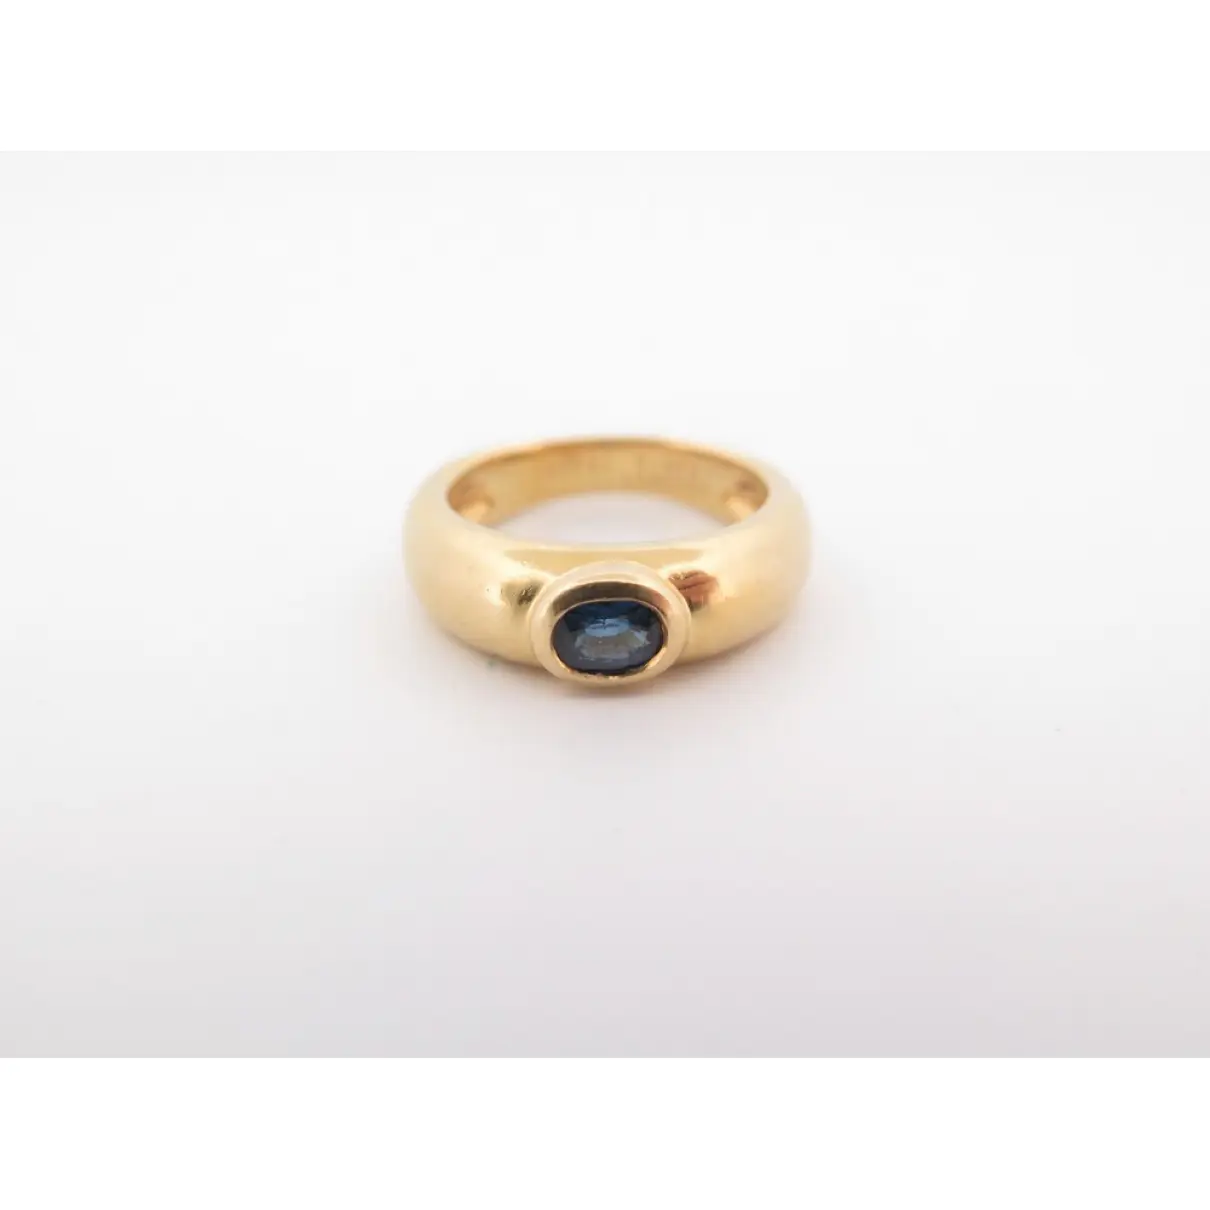 Buy Chaumet Yellow gold ring online - Vintage